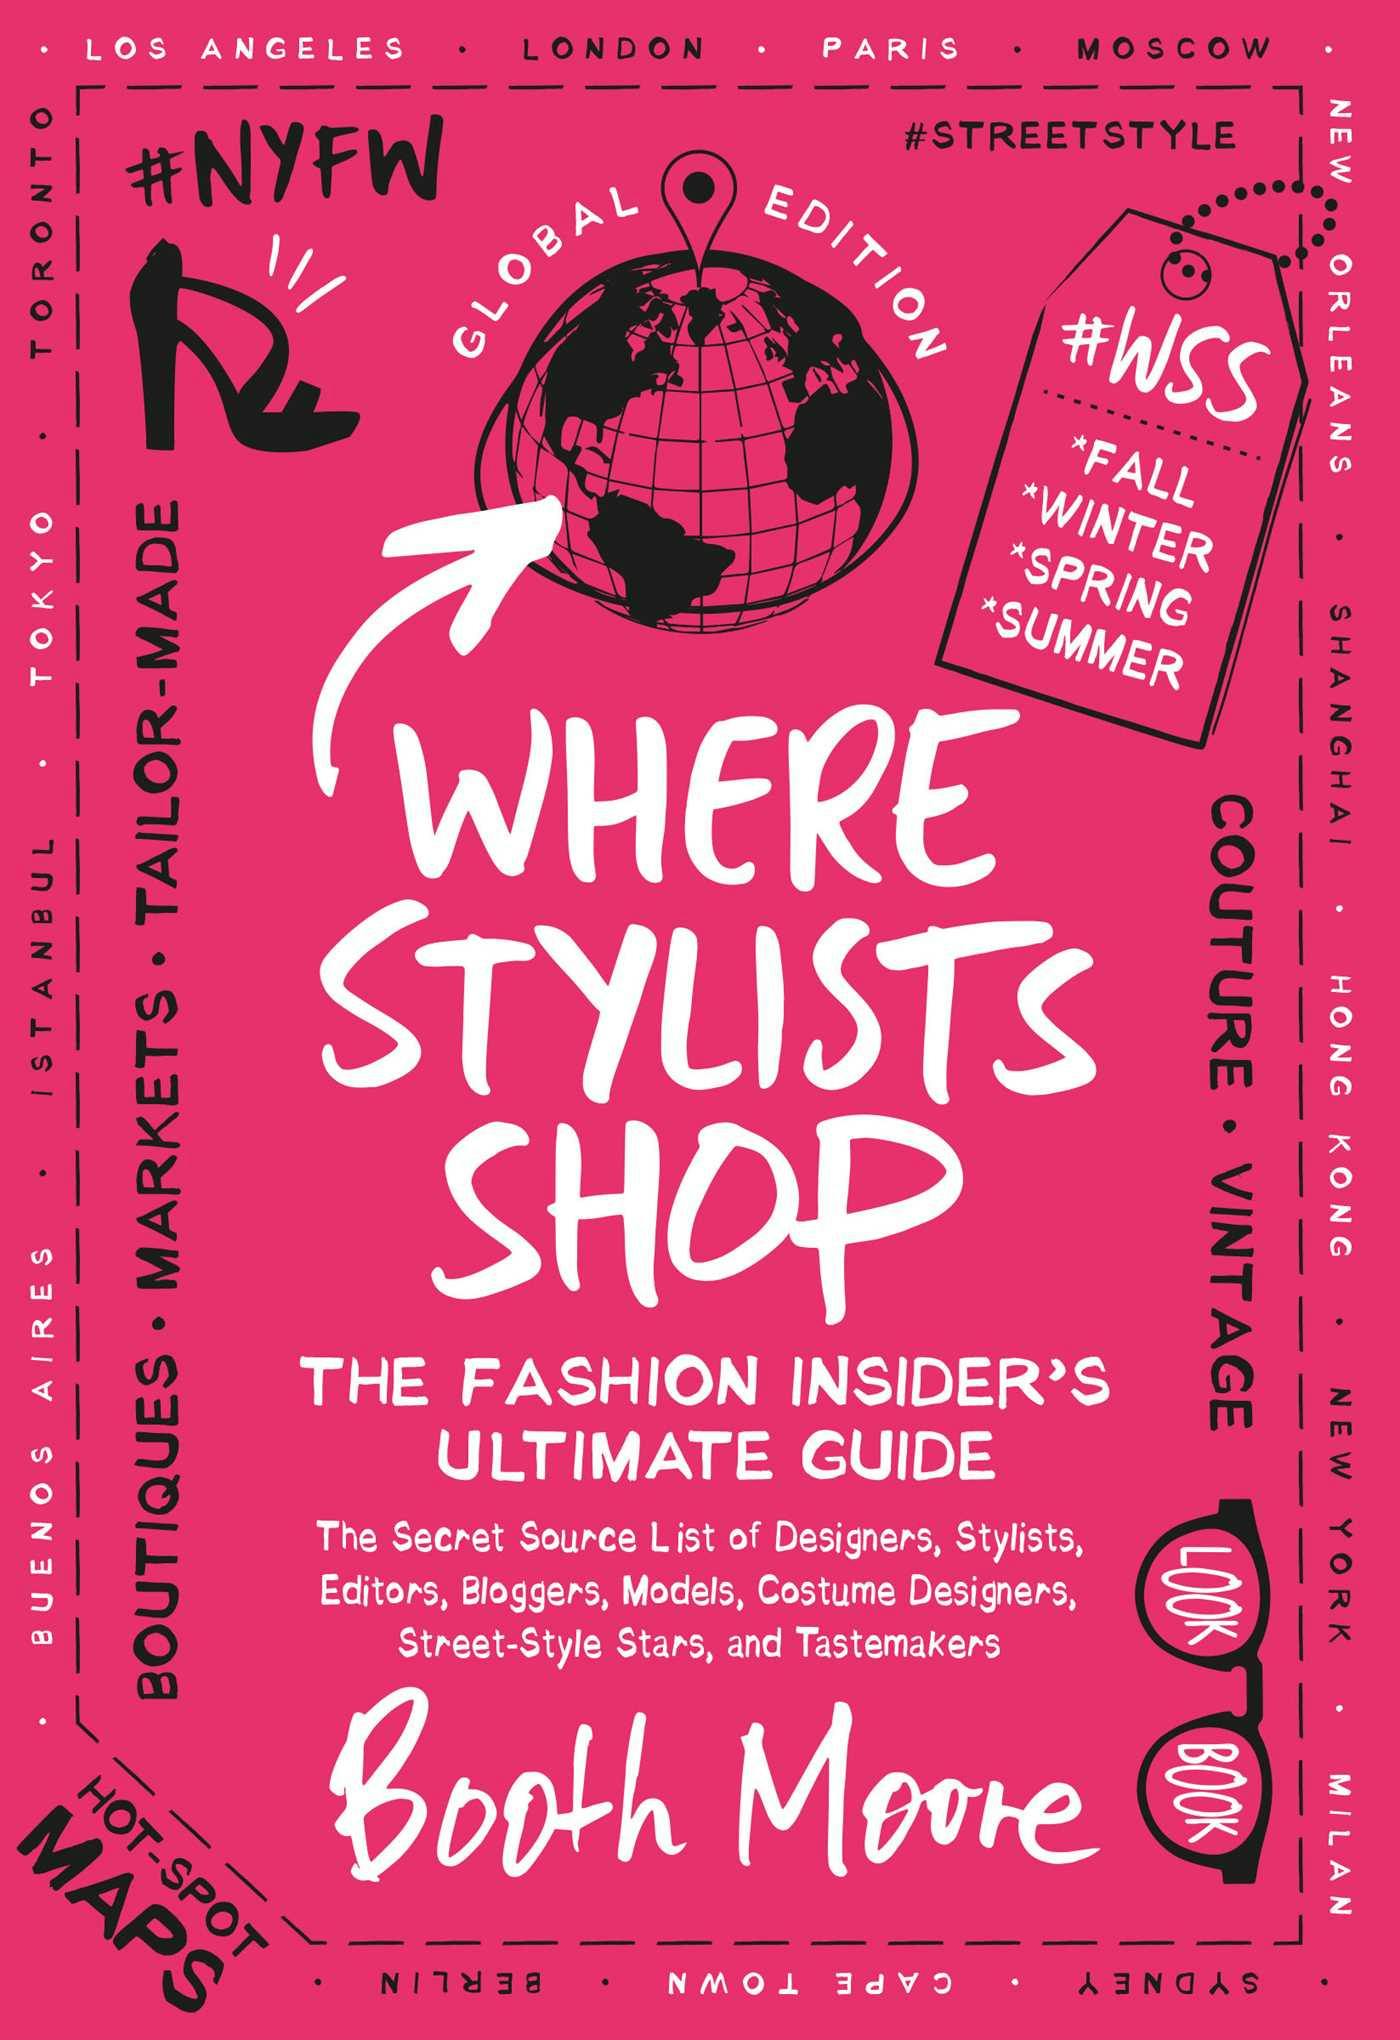 Where Stylists Shop: The Fashion Insider's Ultimate Guide - Booth Moore